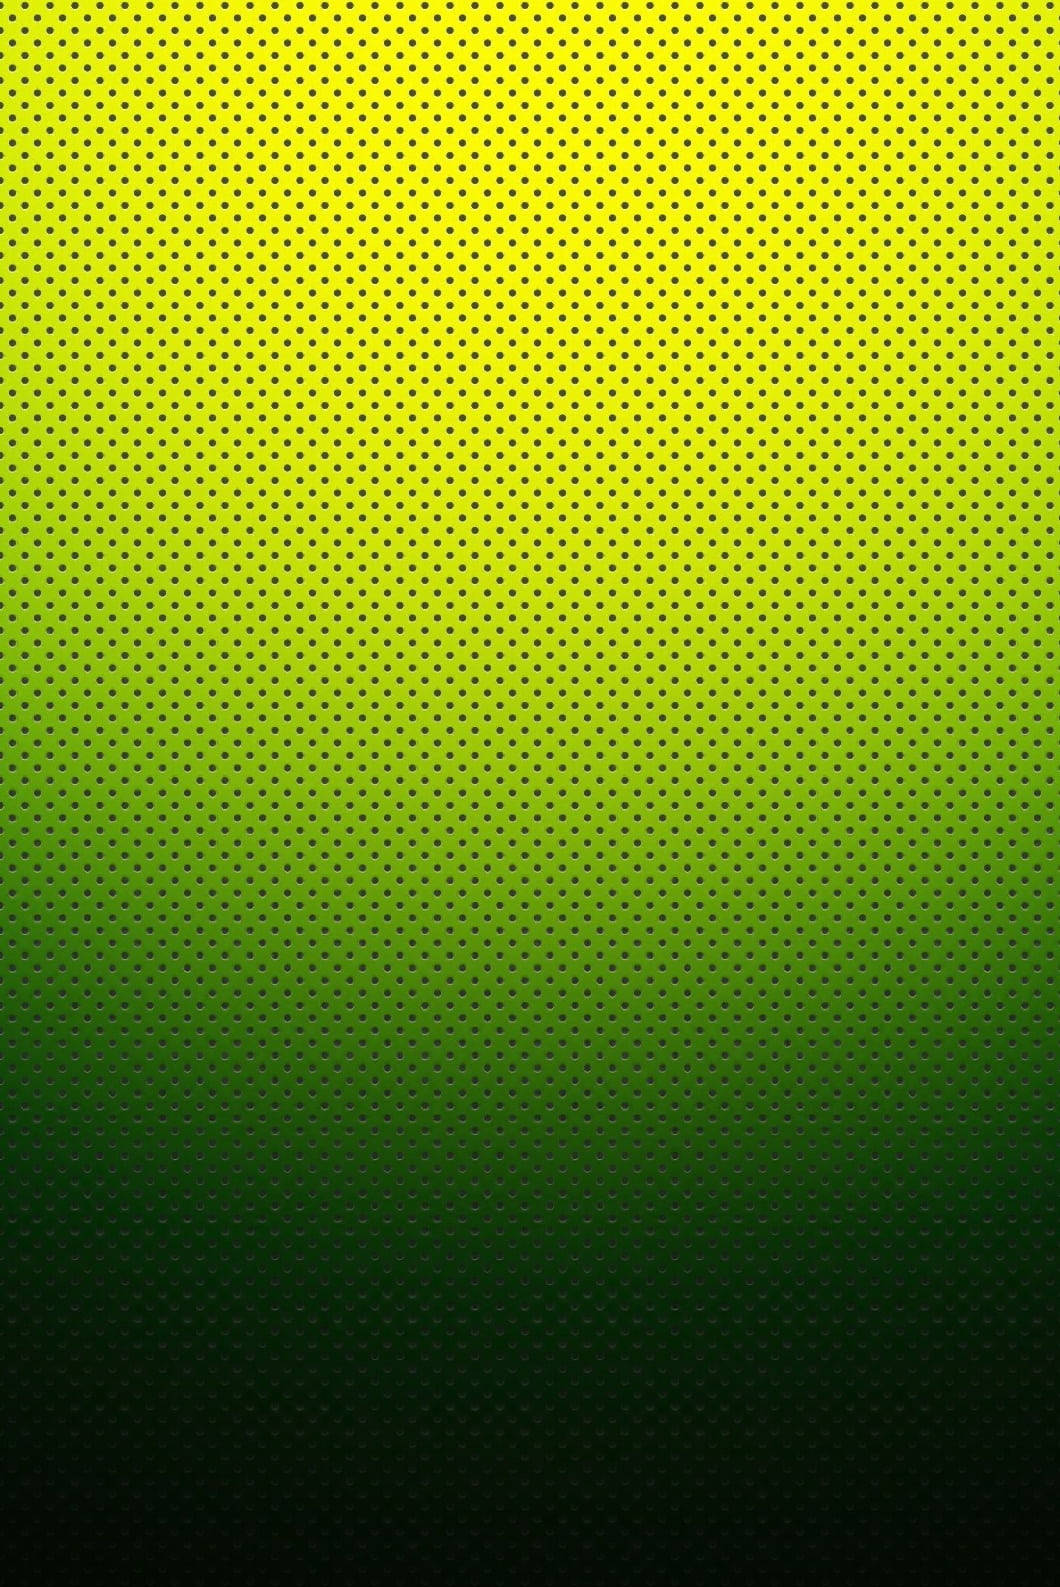 Abstract Dots Iphone 4s Wallpaper